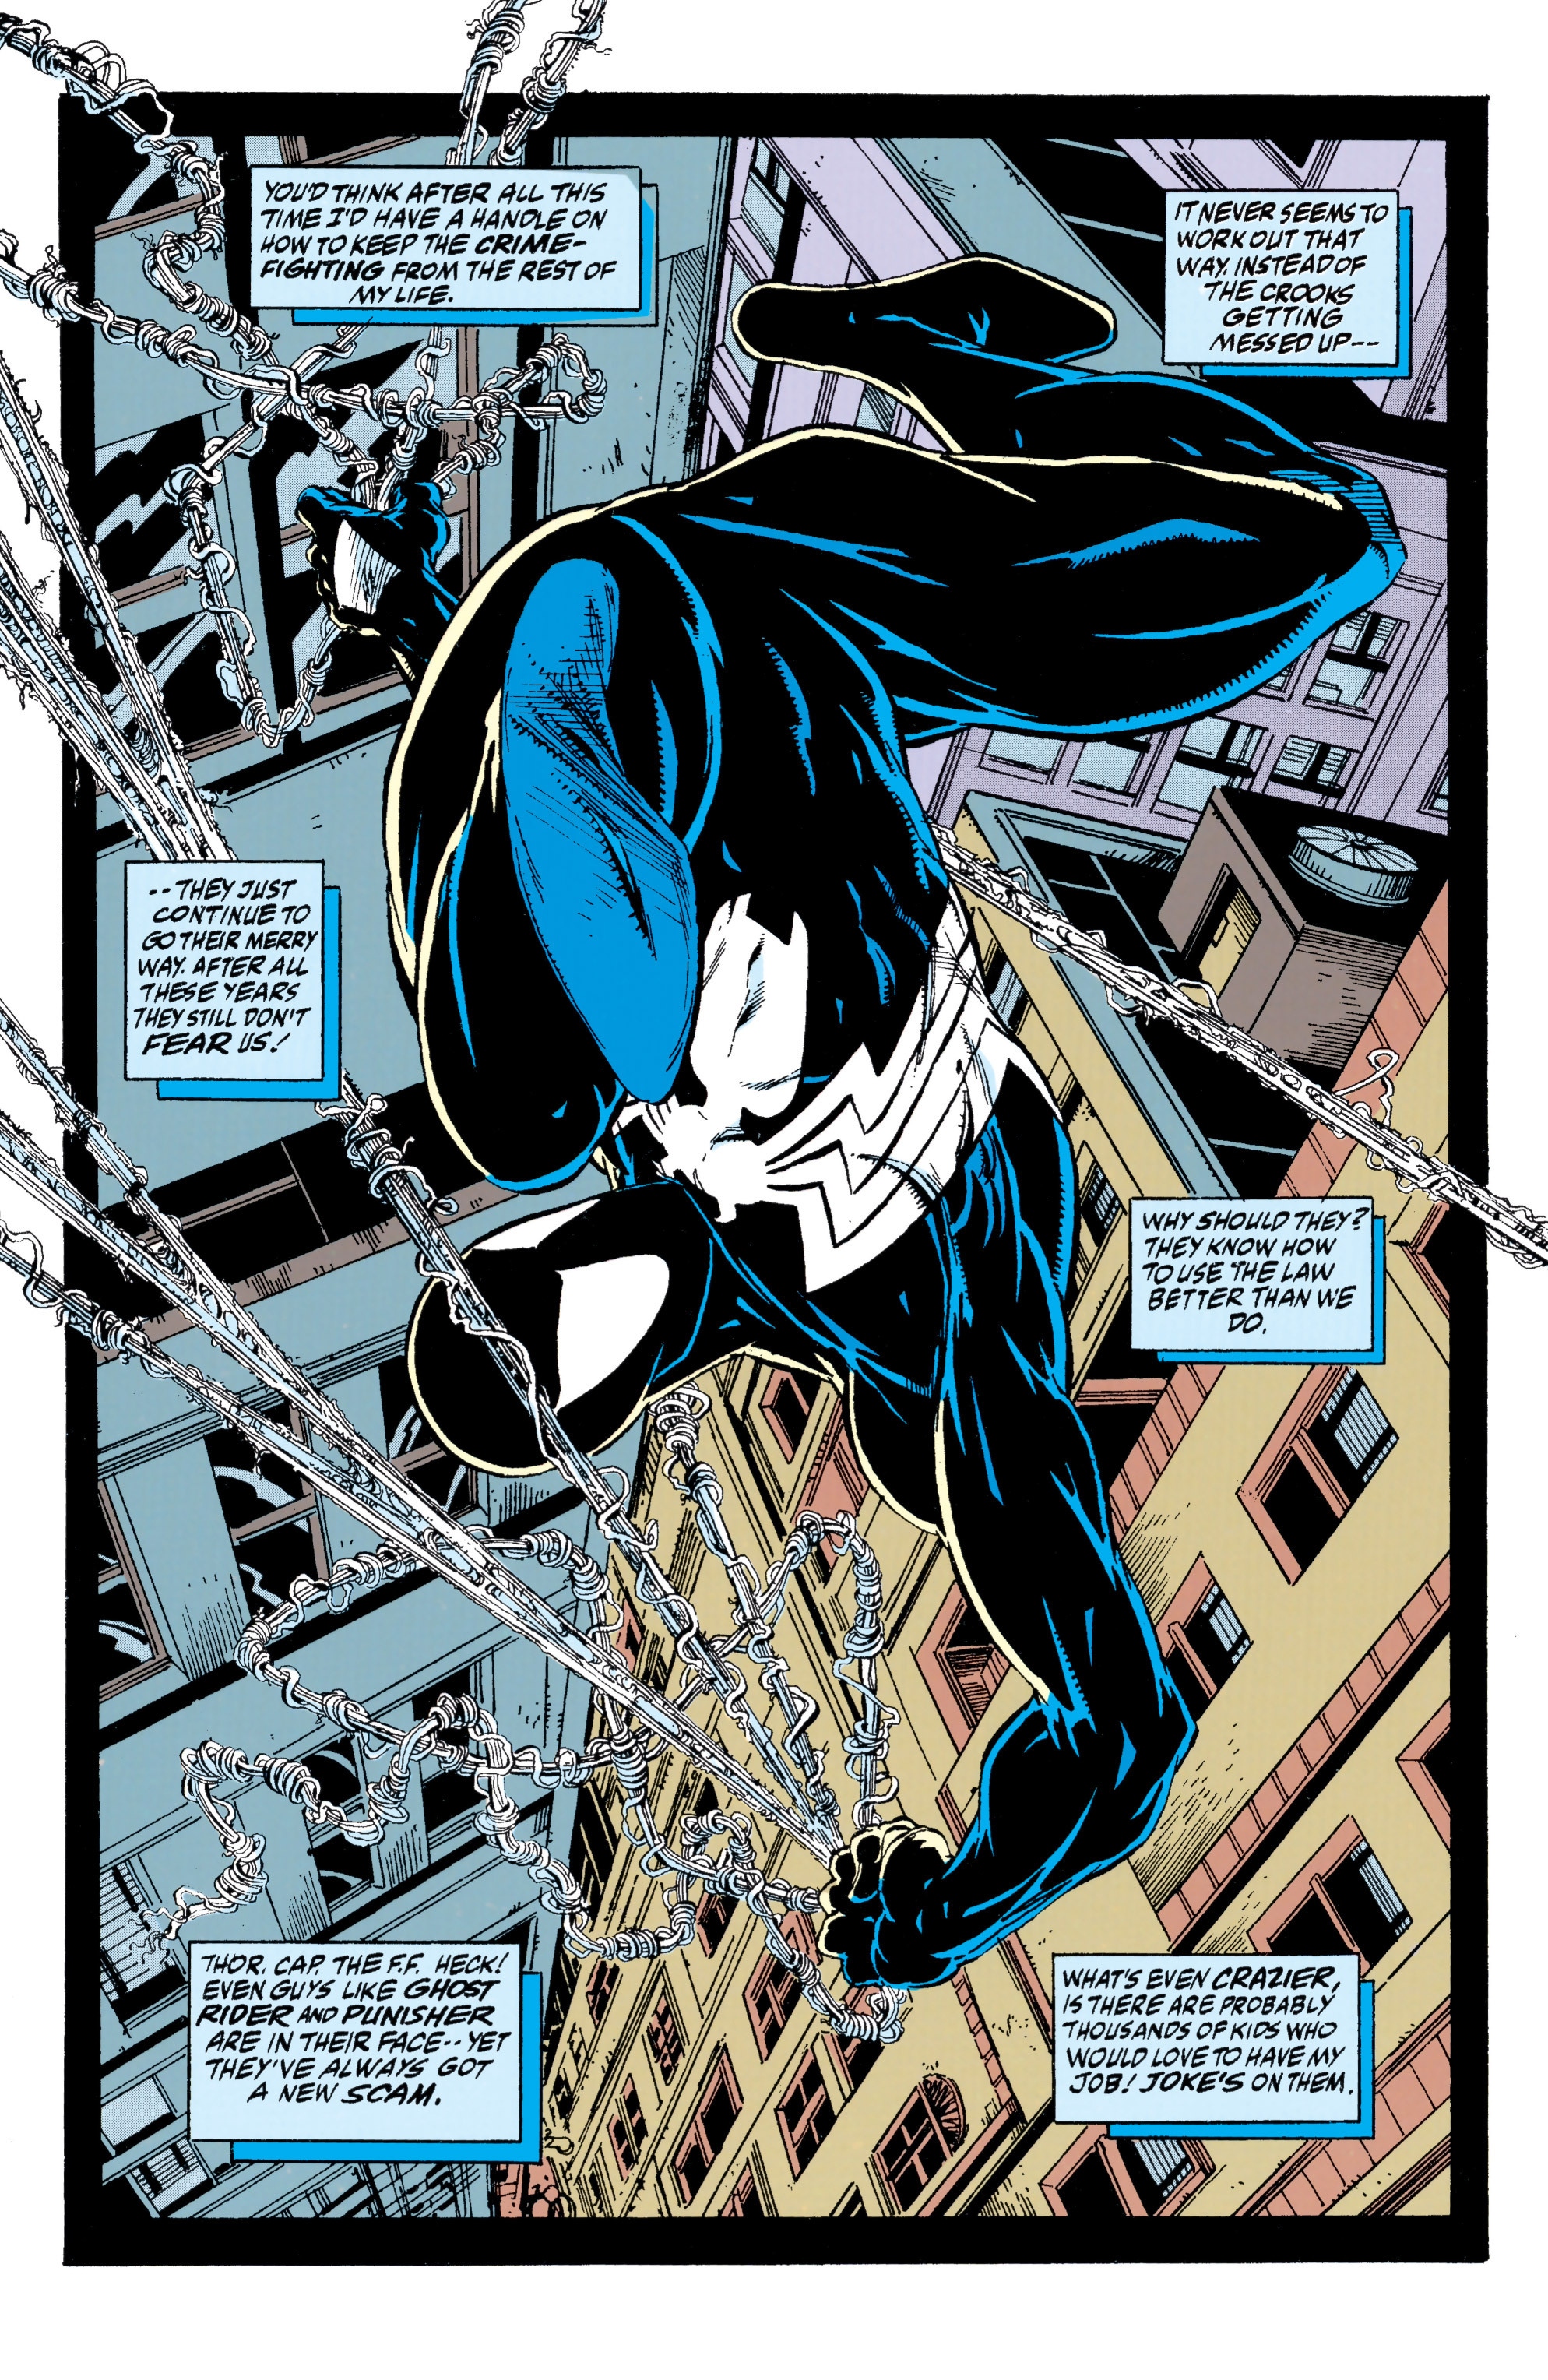 Spider-Man (1990) 13_-_Sub_City_Part_1_of_2 Page 19